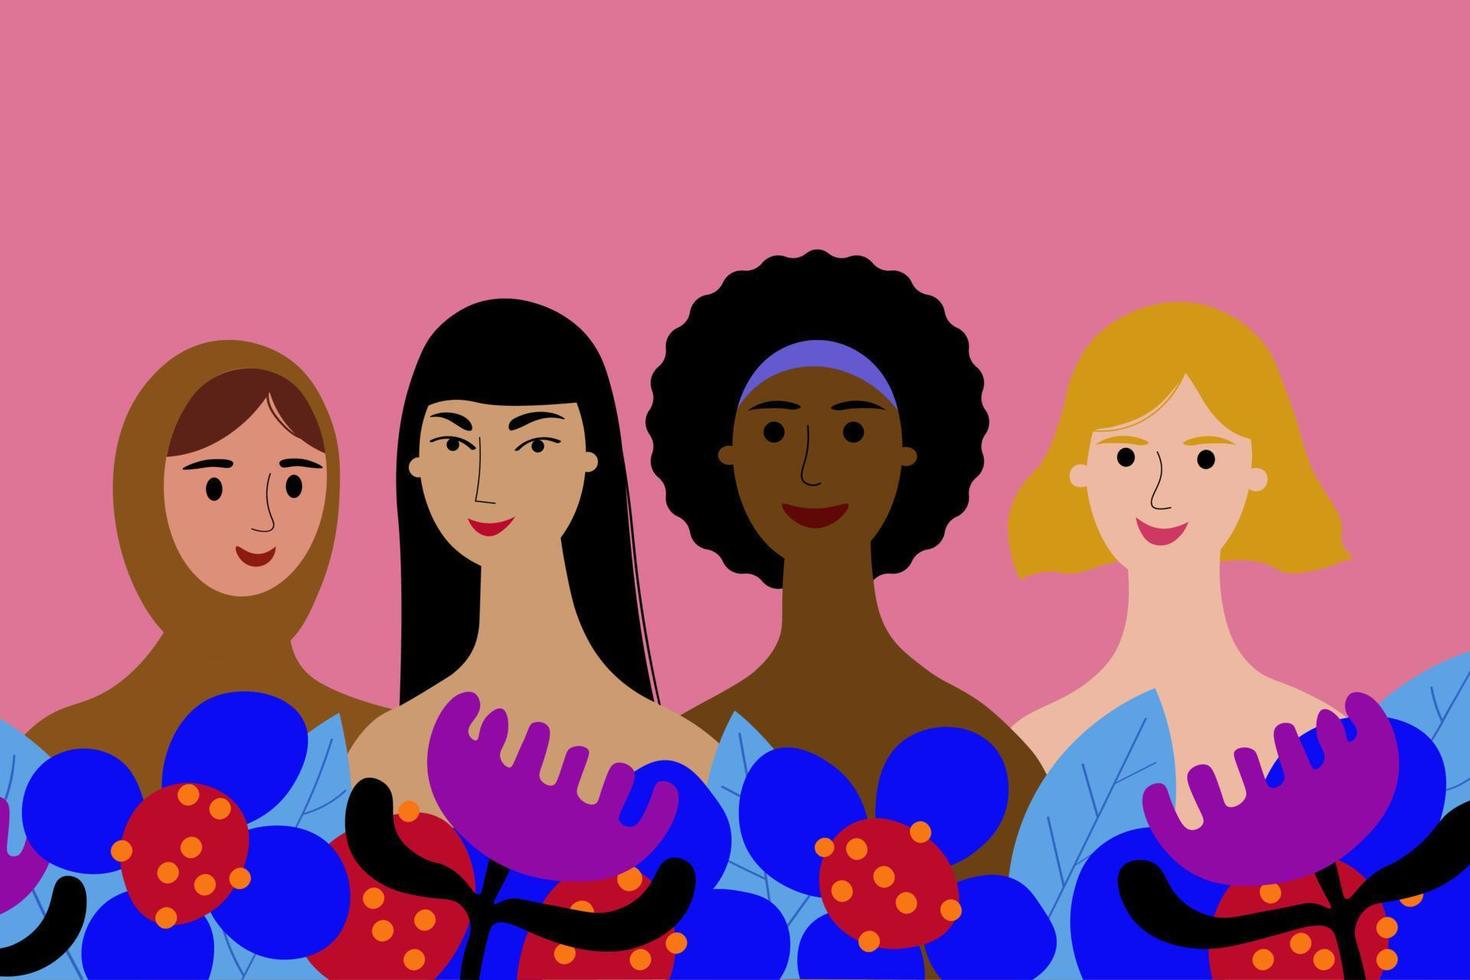 Multiethnic group of women. Illustration with many female faces of different nationalities and colors. Women's solidarity, ethnic tolerance, women's society. Flat vector illustration